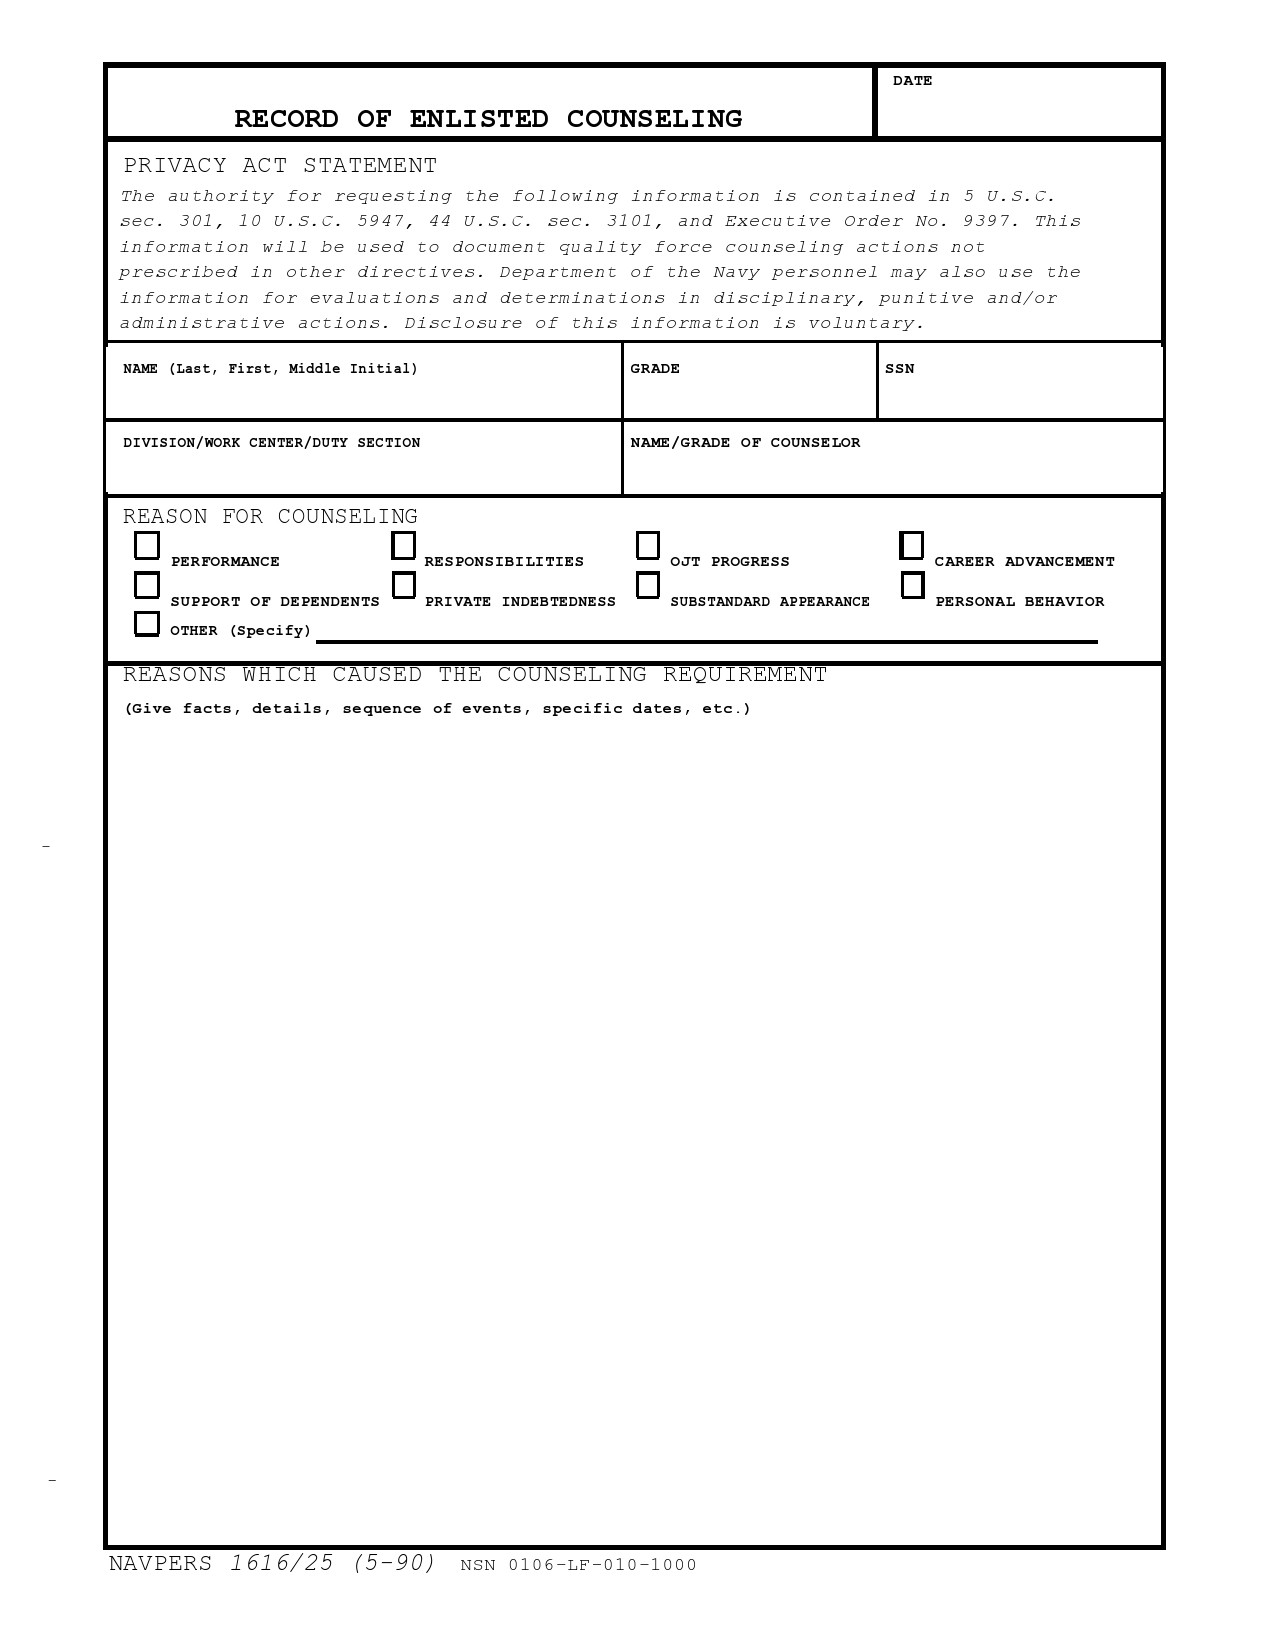 Free army counseling form 13